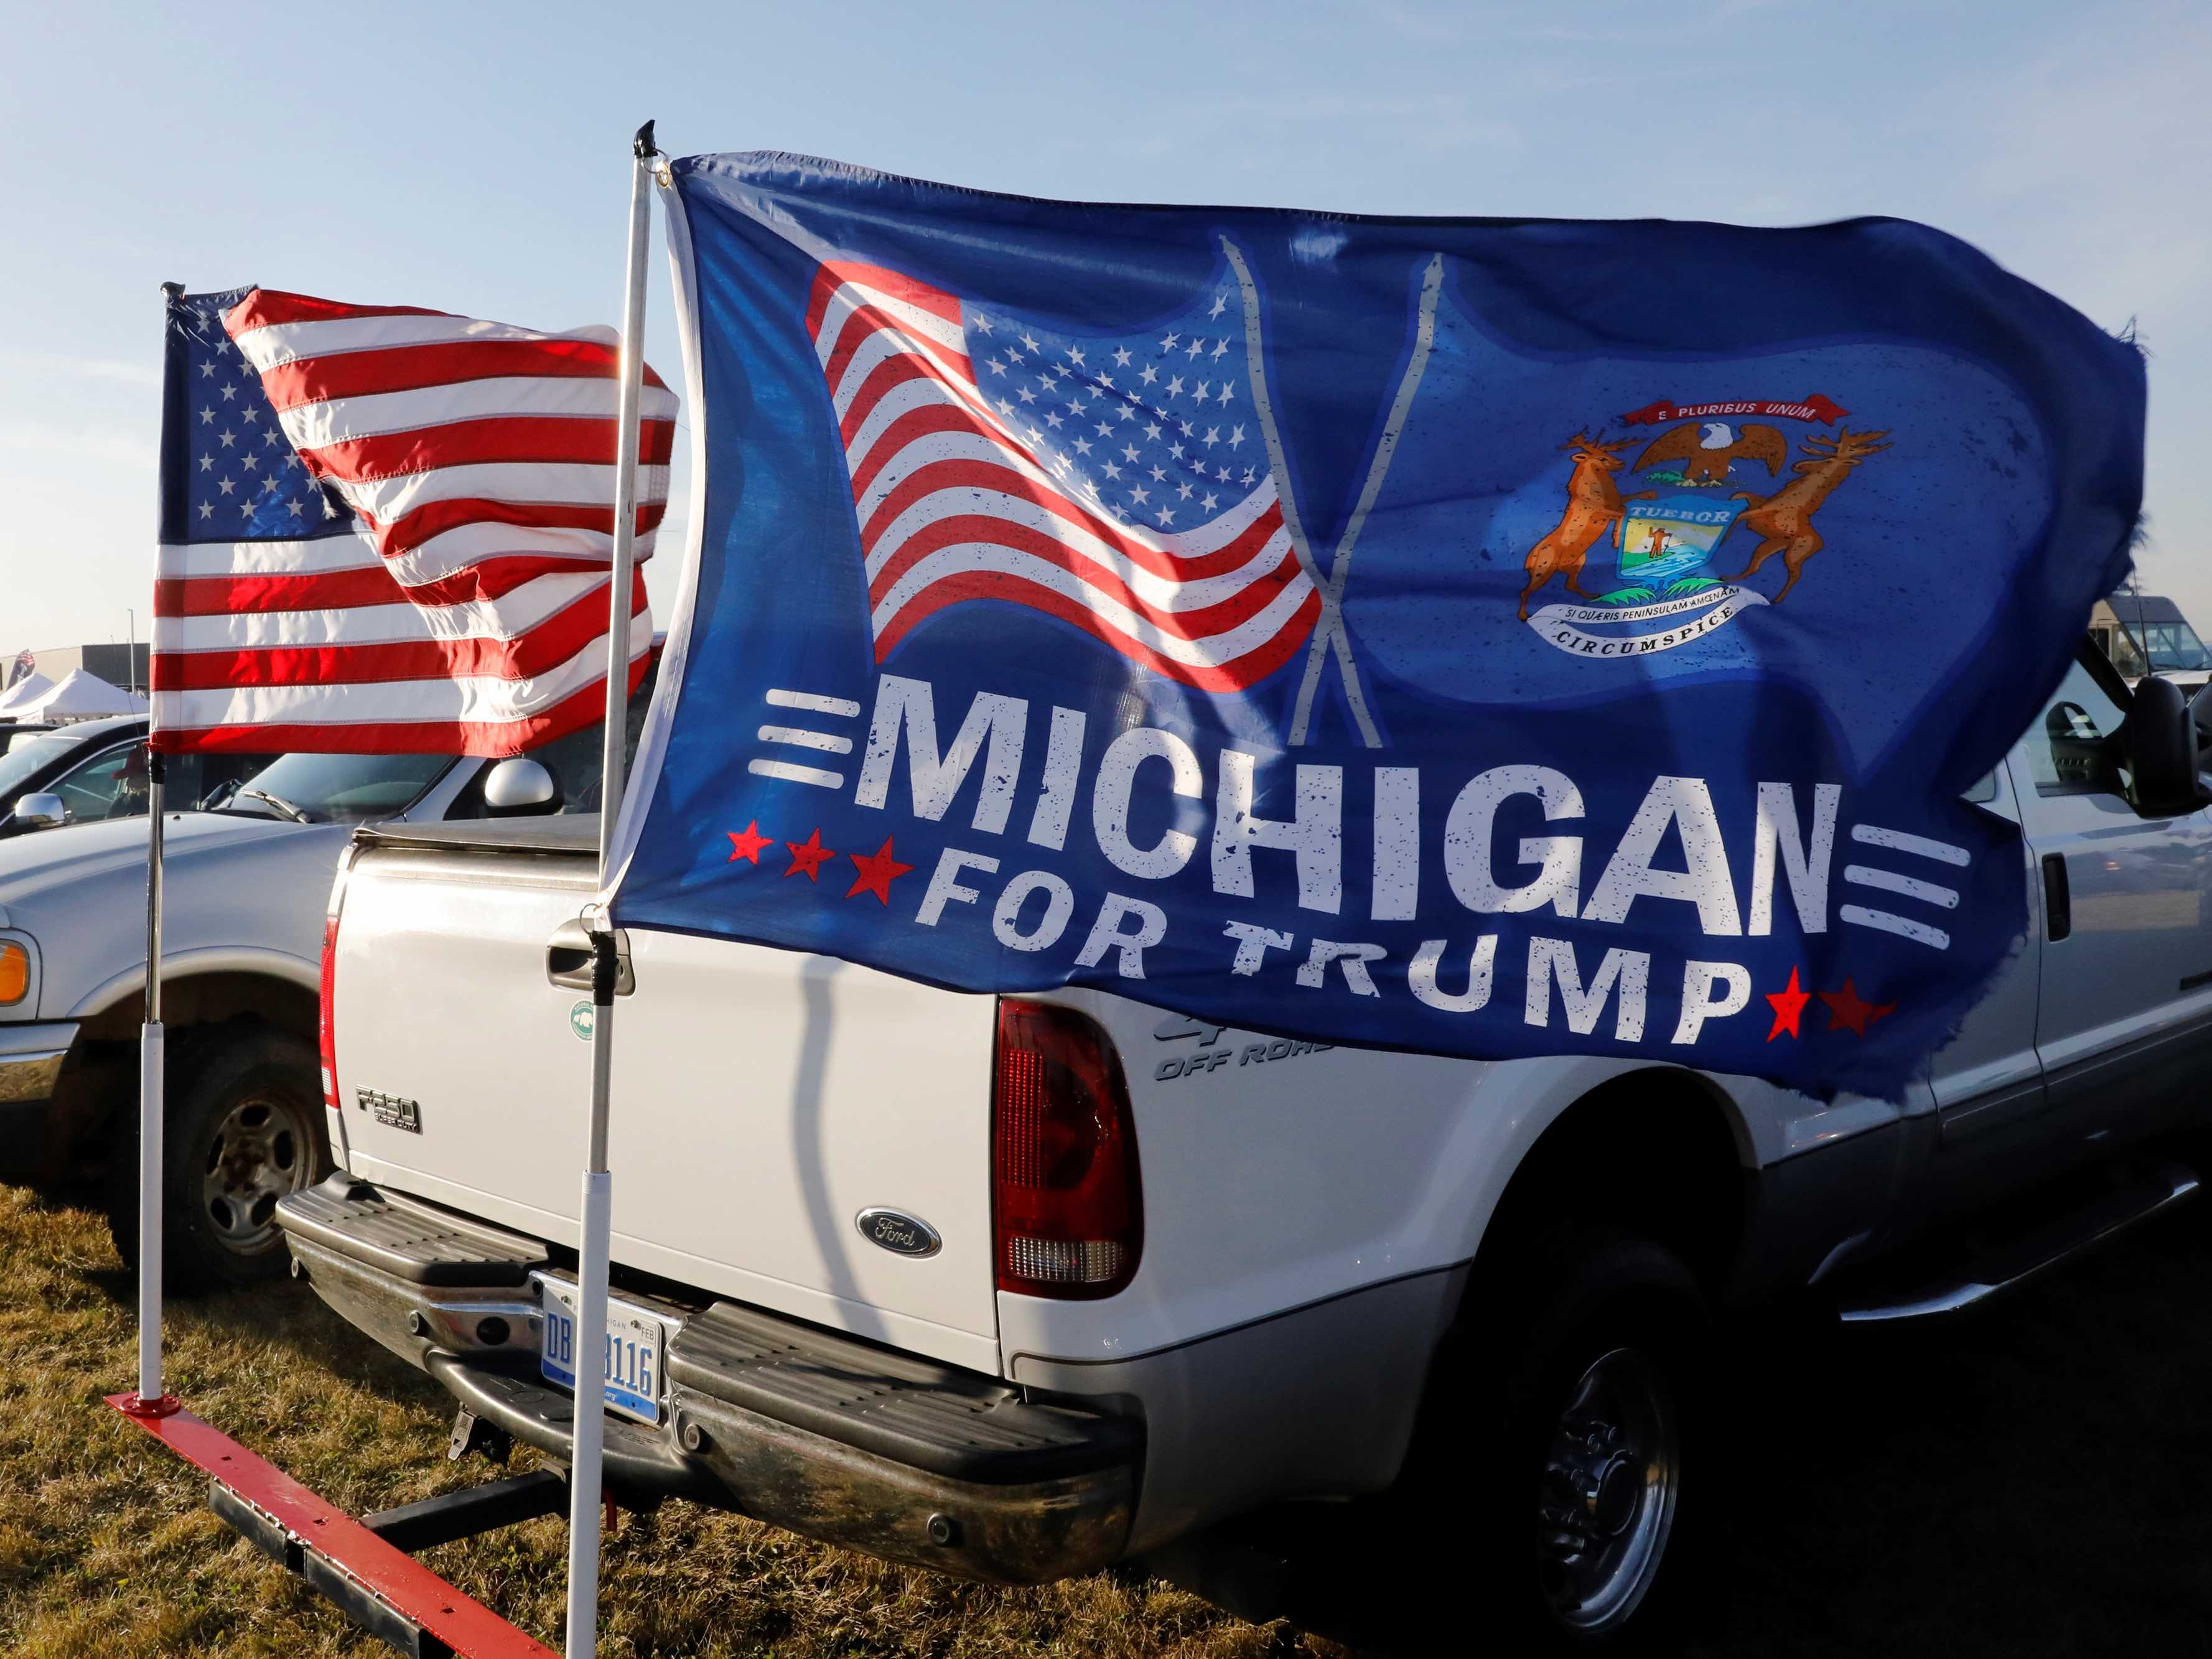 Michigan for Trump (Jeff Kowalsky / AFP / Getty)